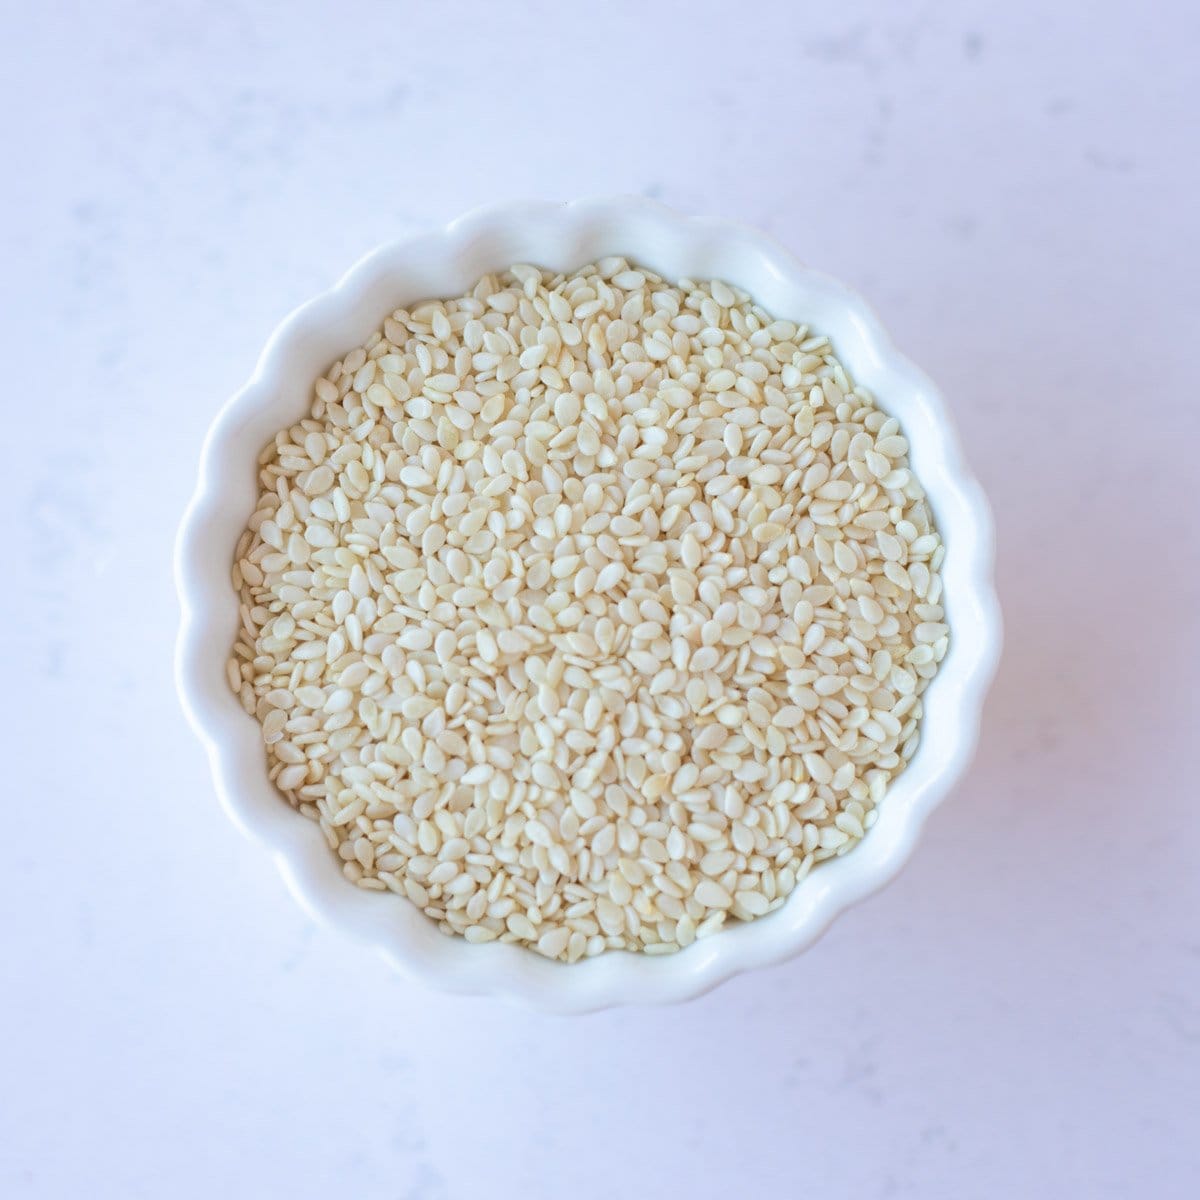 Sesame seeds in a small white bowl.